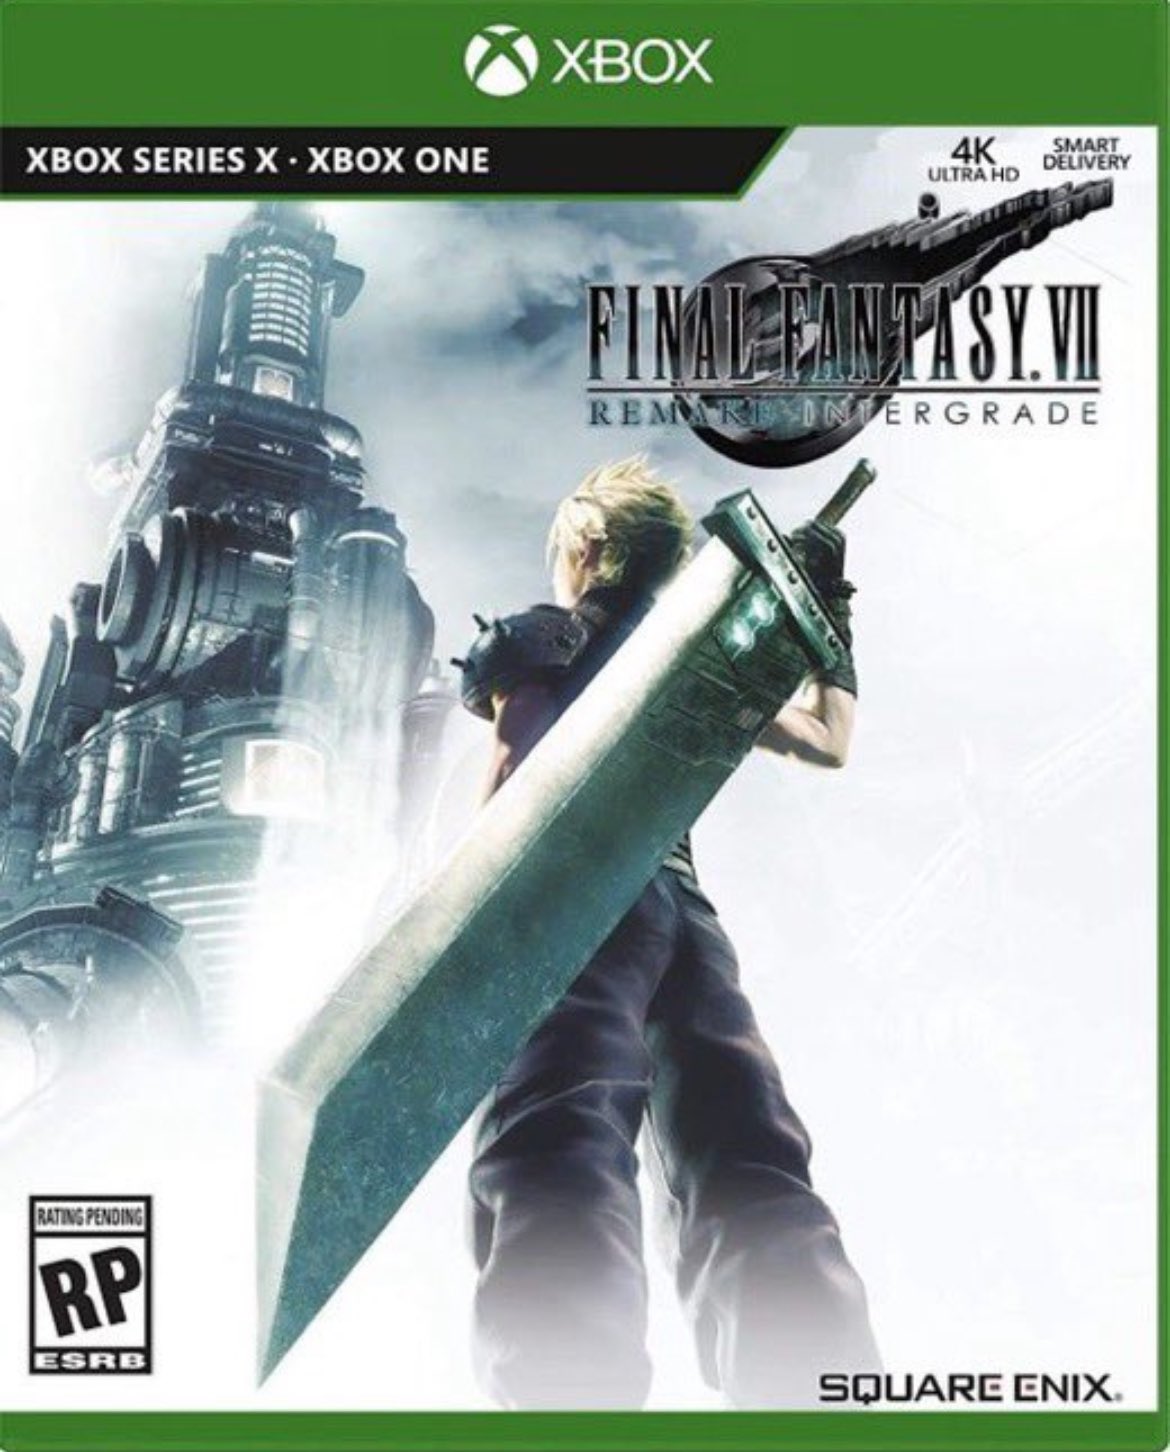 Jamie Moran on X: Do you want Final Fantasy 7 Remake to Come to Xbox?   / X